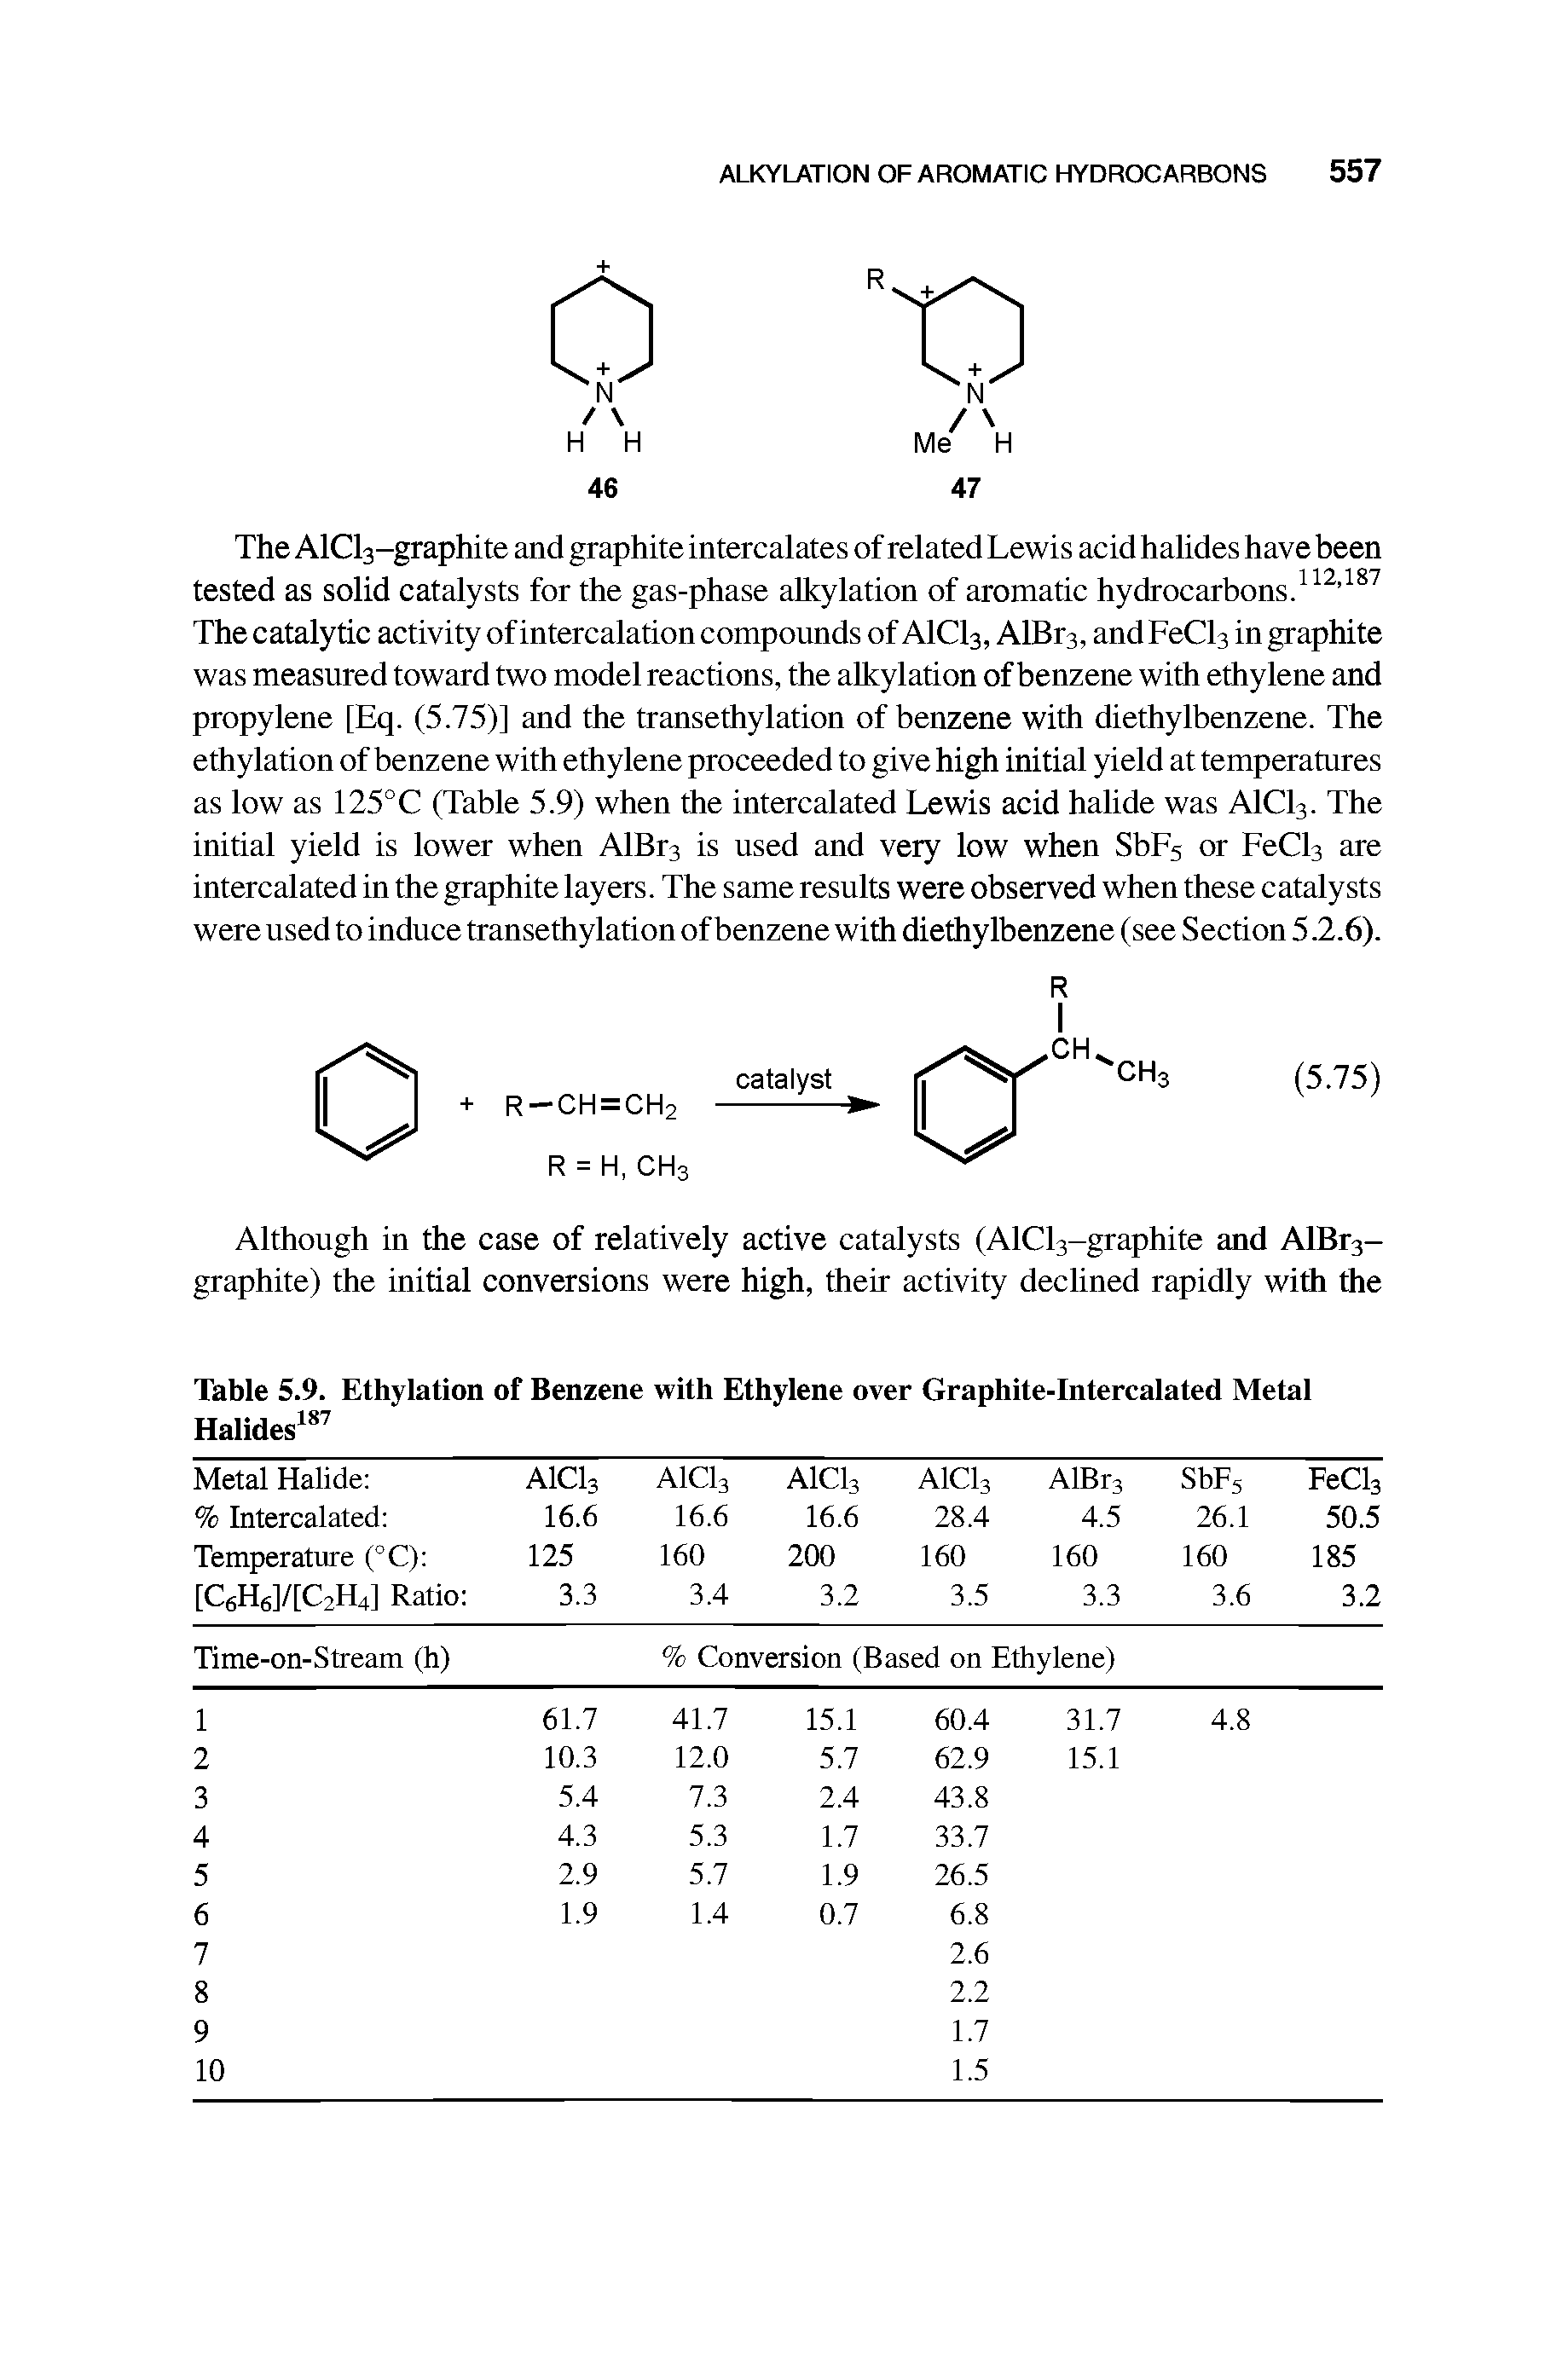 Table 5.9. Ethylation of Benzene with Ethylene over Graphite-Intercalated Metal Halides187...